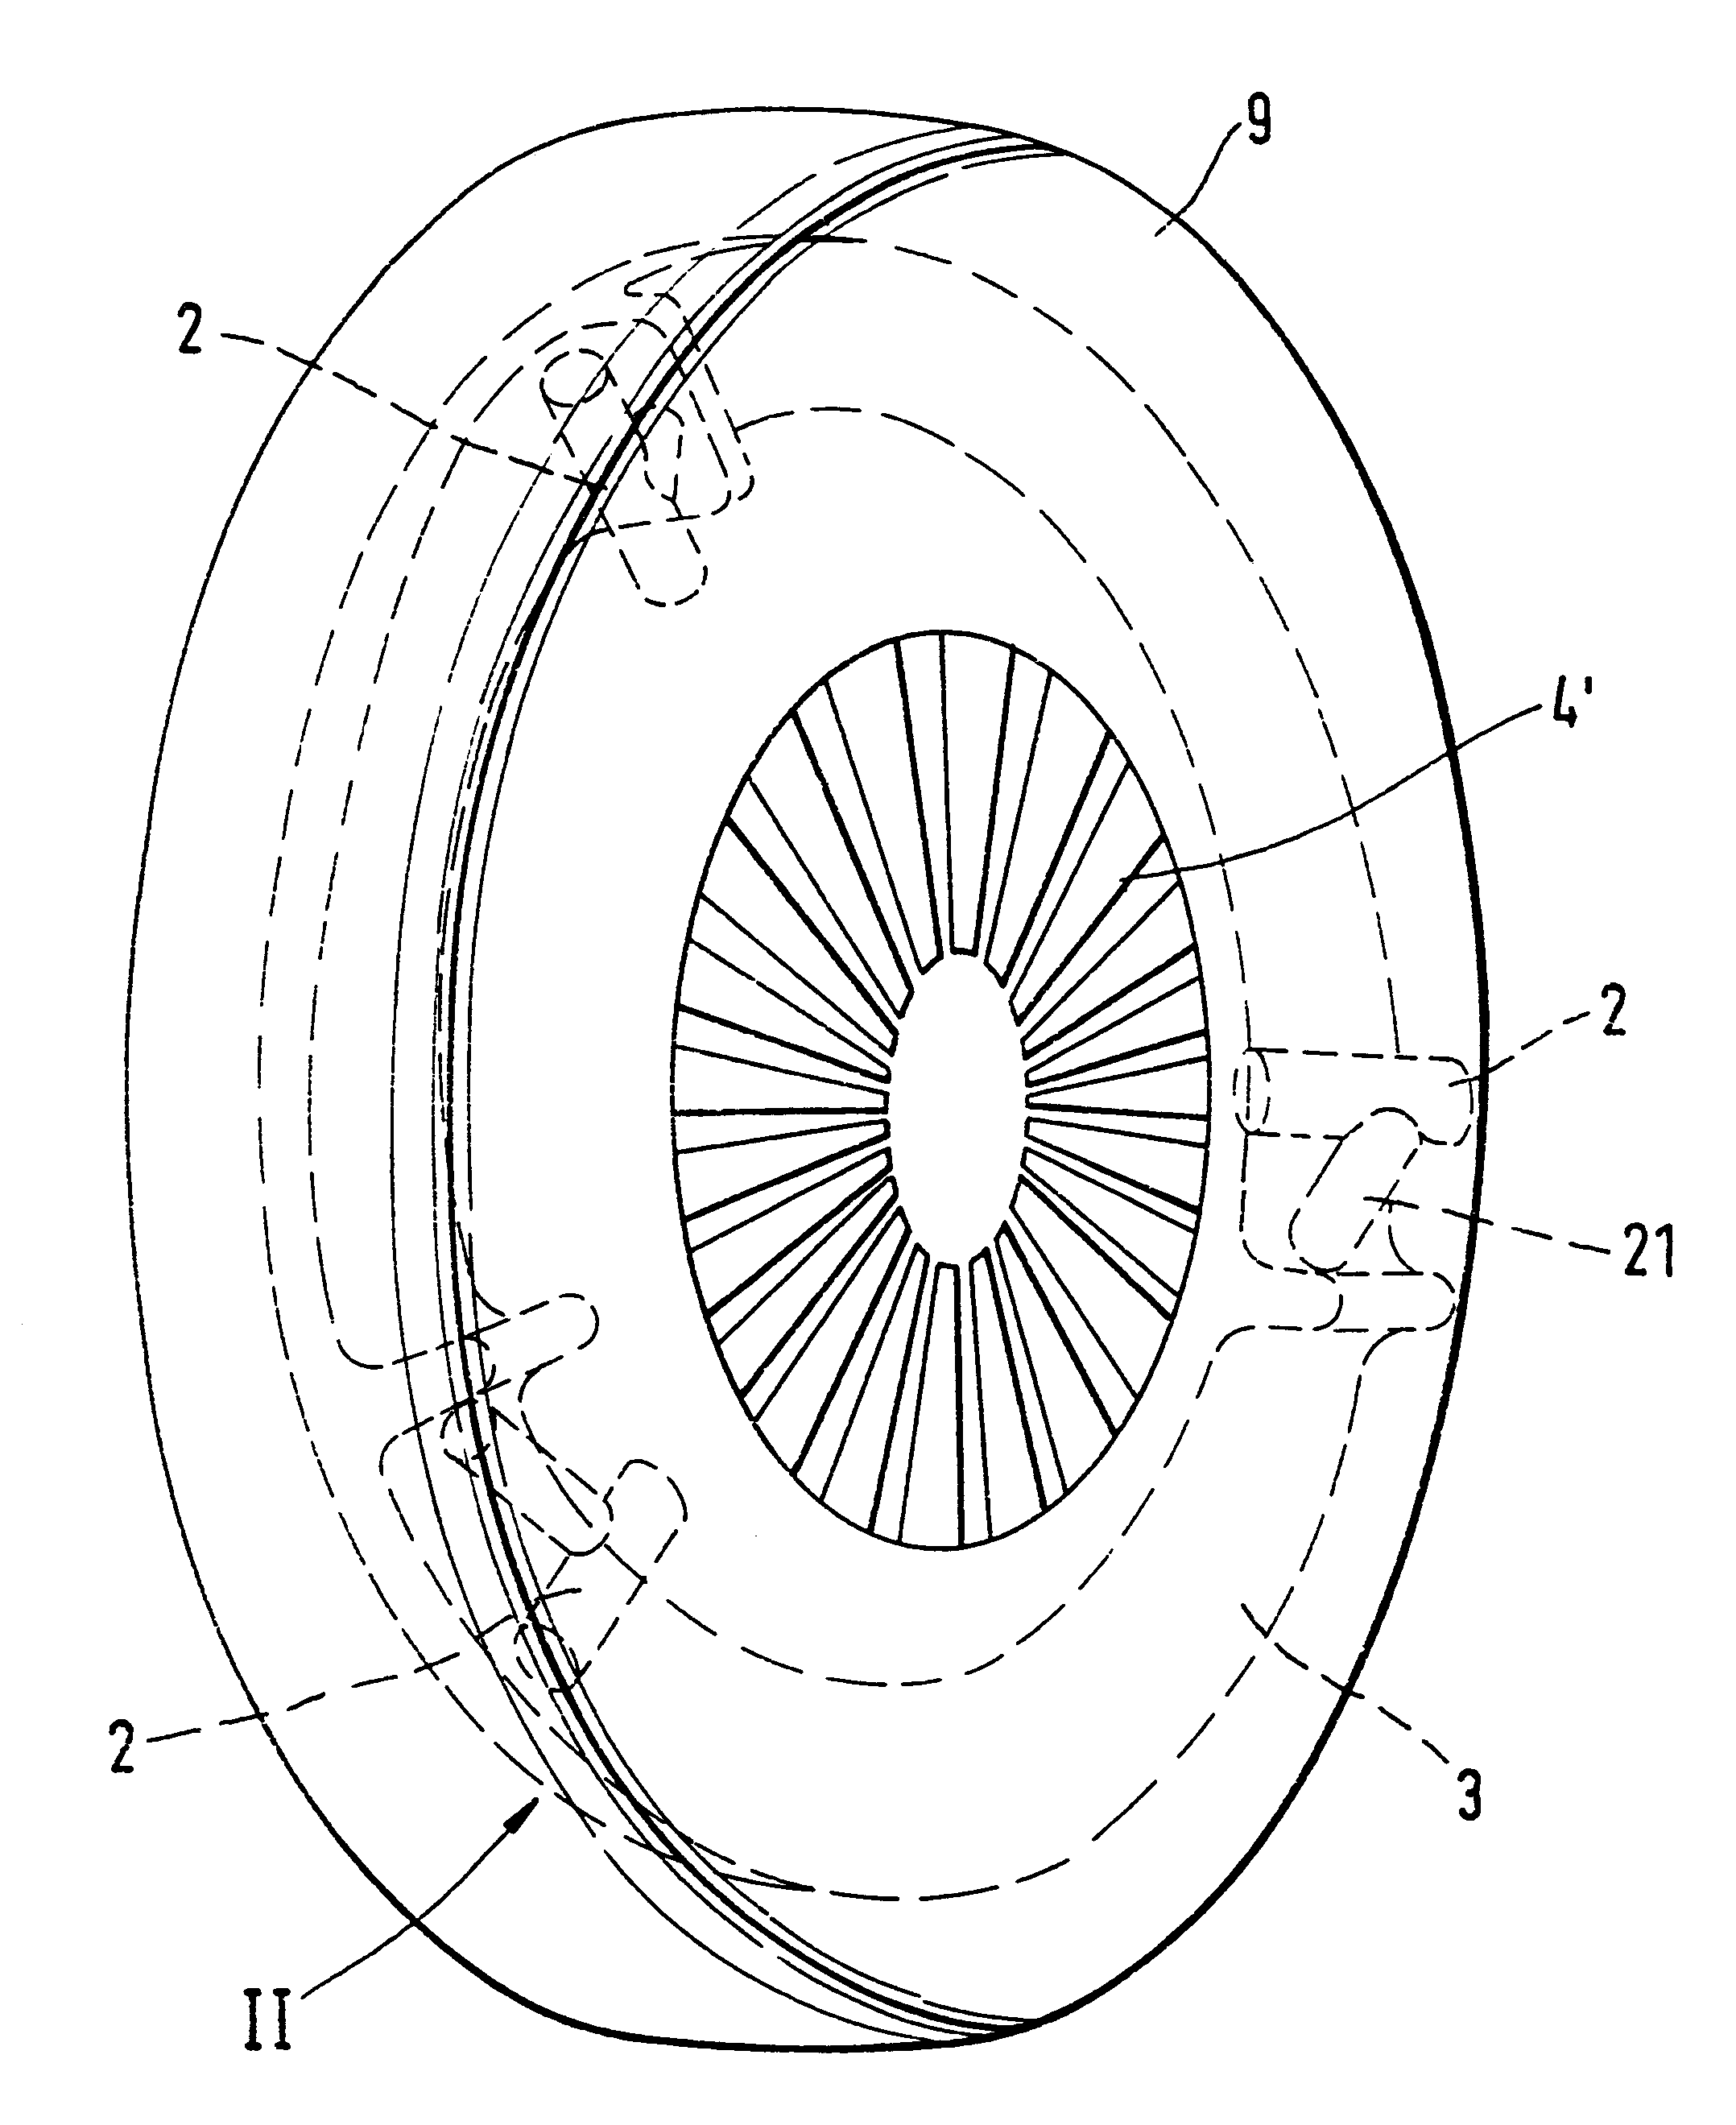 Self-reinforcing friction clutch